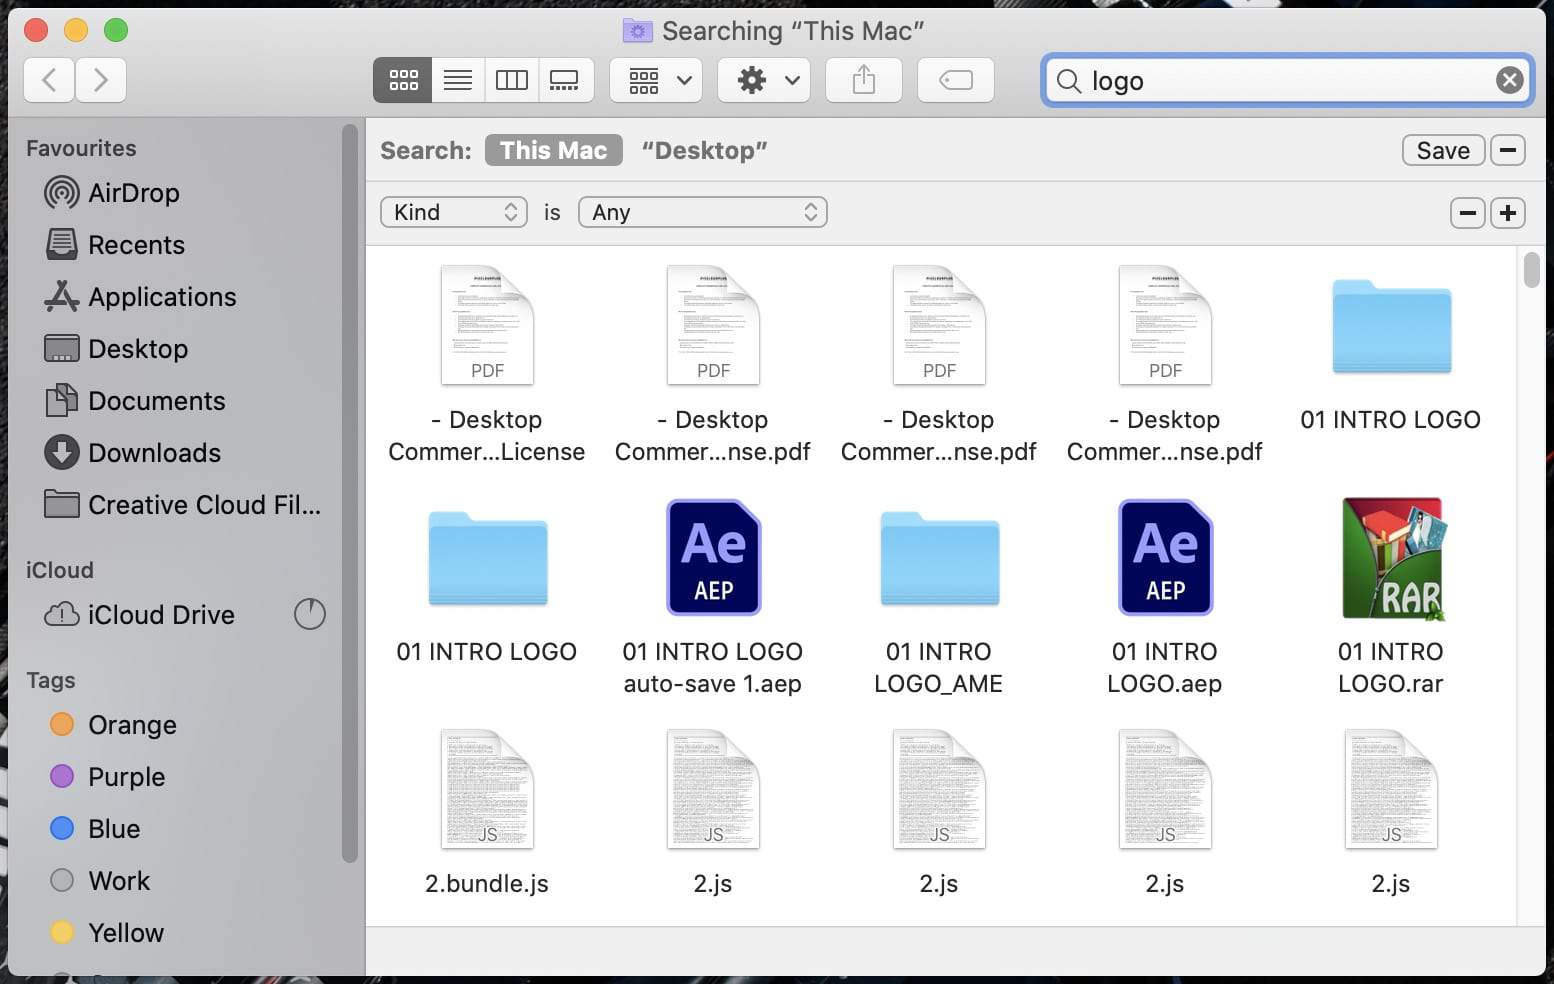 How to search for a file by typing its name on the Mac